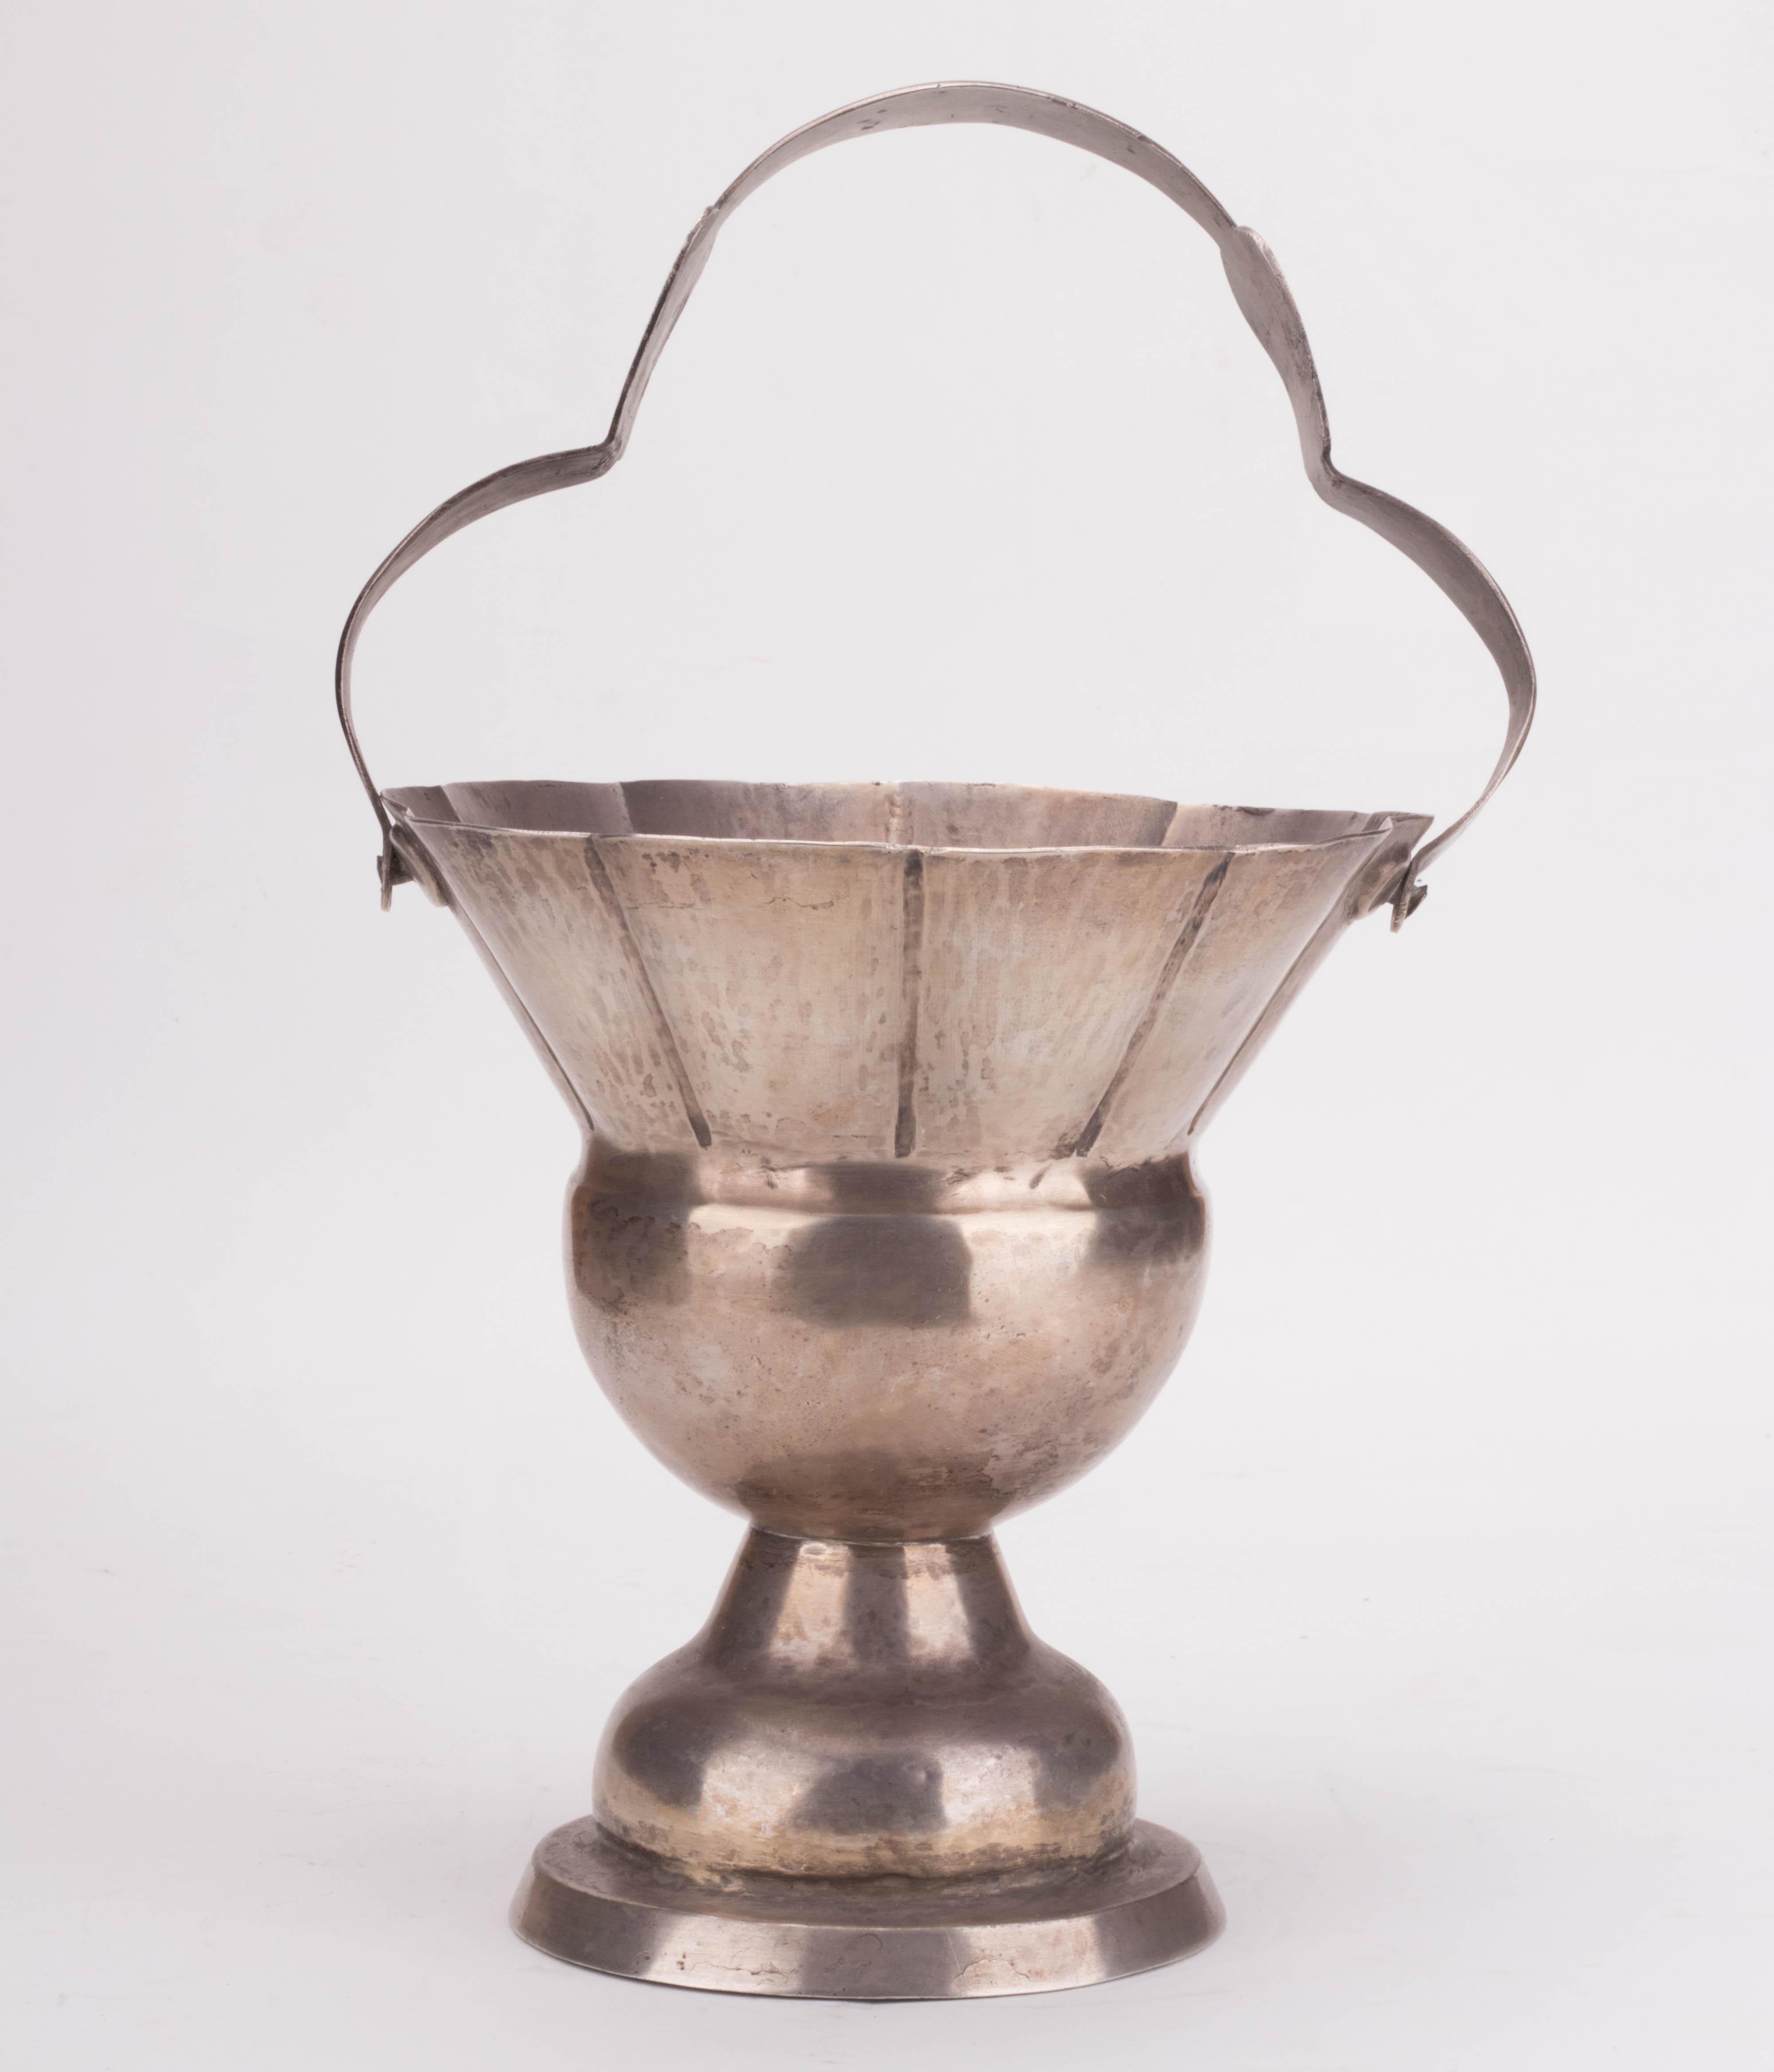 1780s Peruvian silver basket shaped centrepiece with handle. 

Silver by weight: 530g.